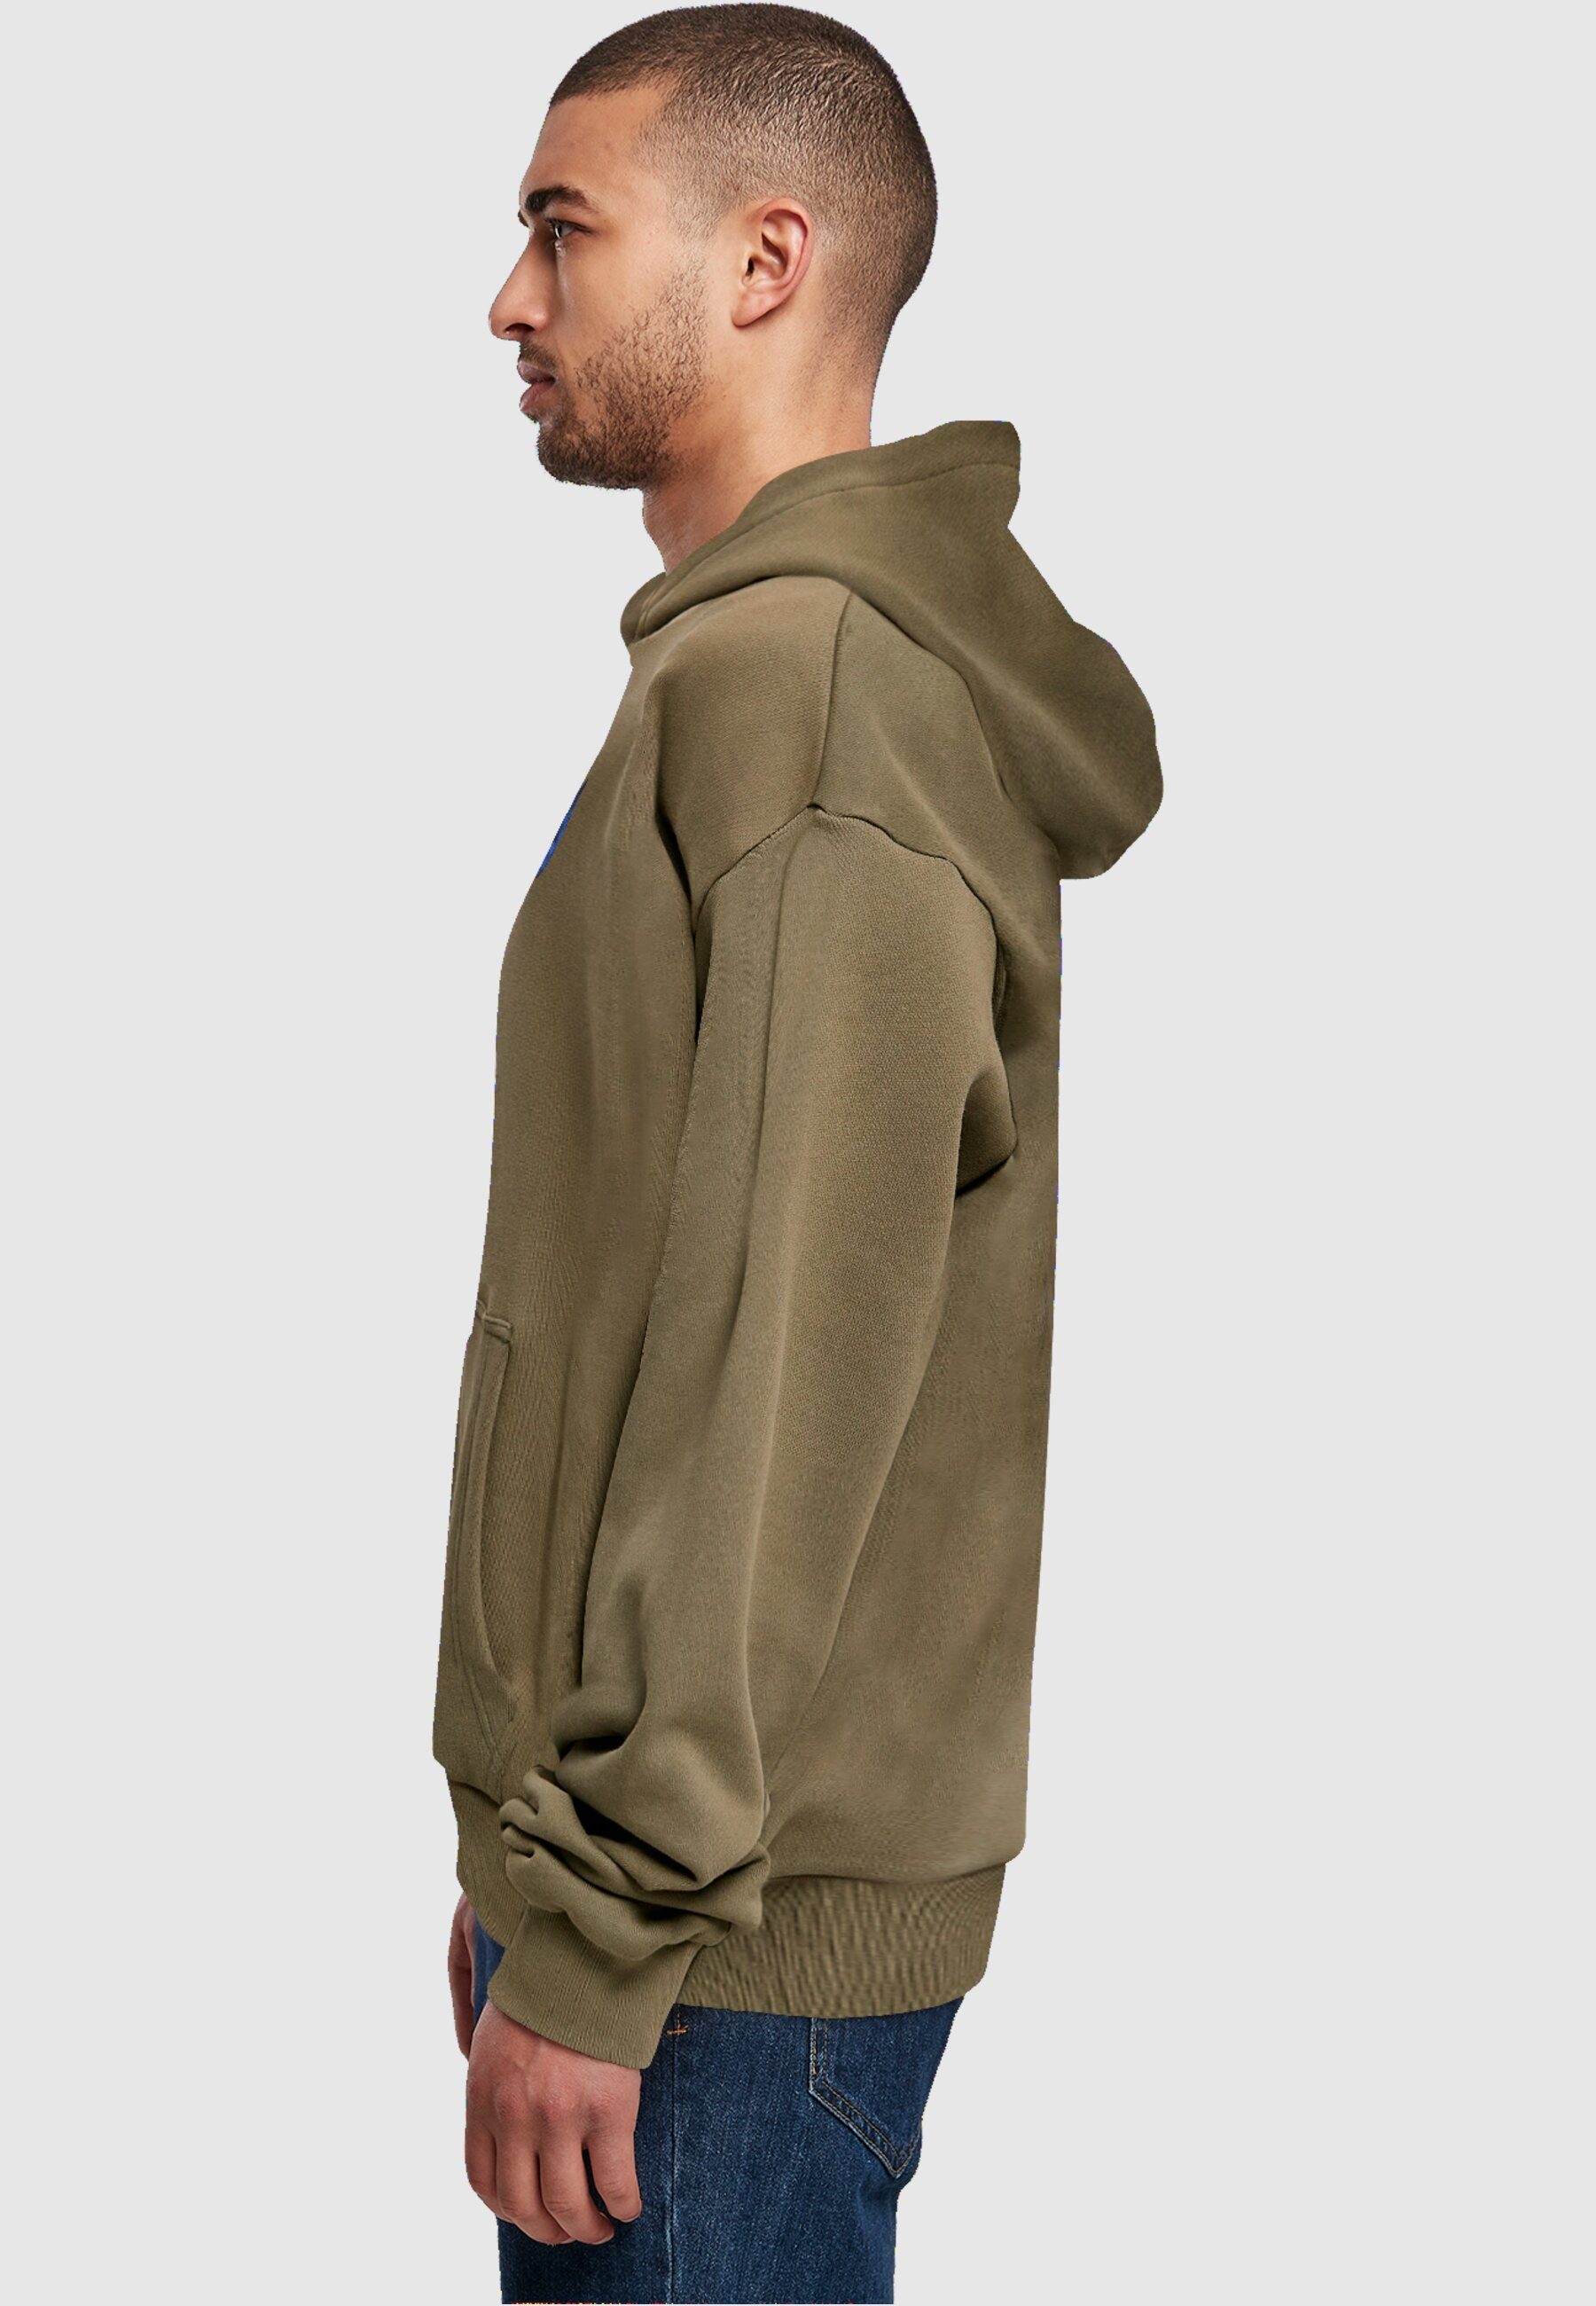 Heavy Sweater Le Upscale Tee Herren Papillon Hoody by Oversize (1-tlg) olive Mister